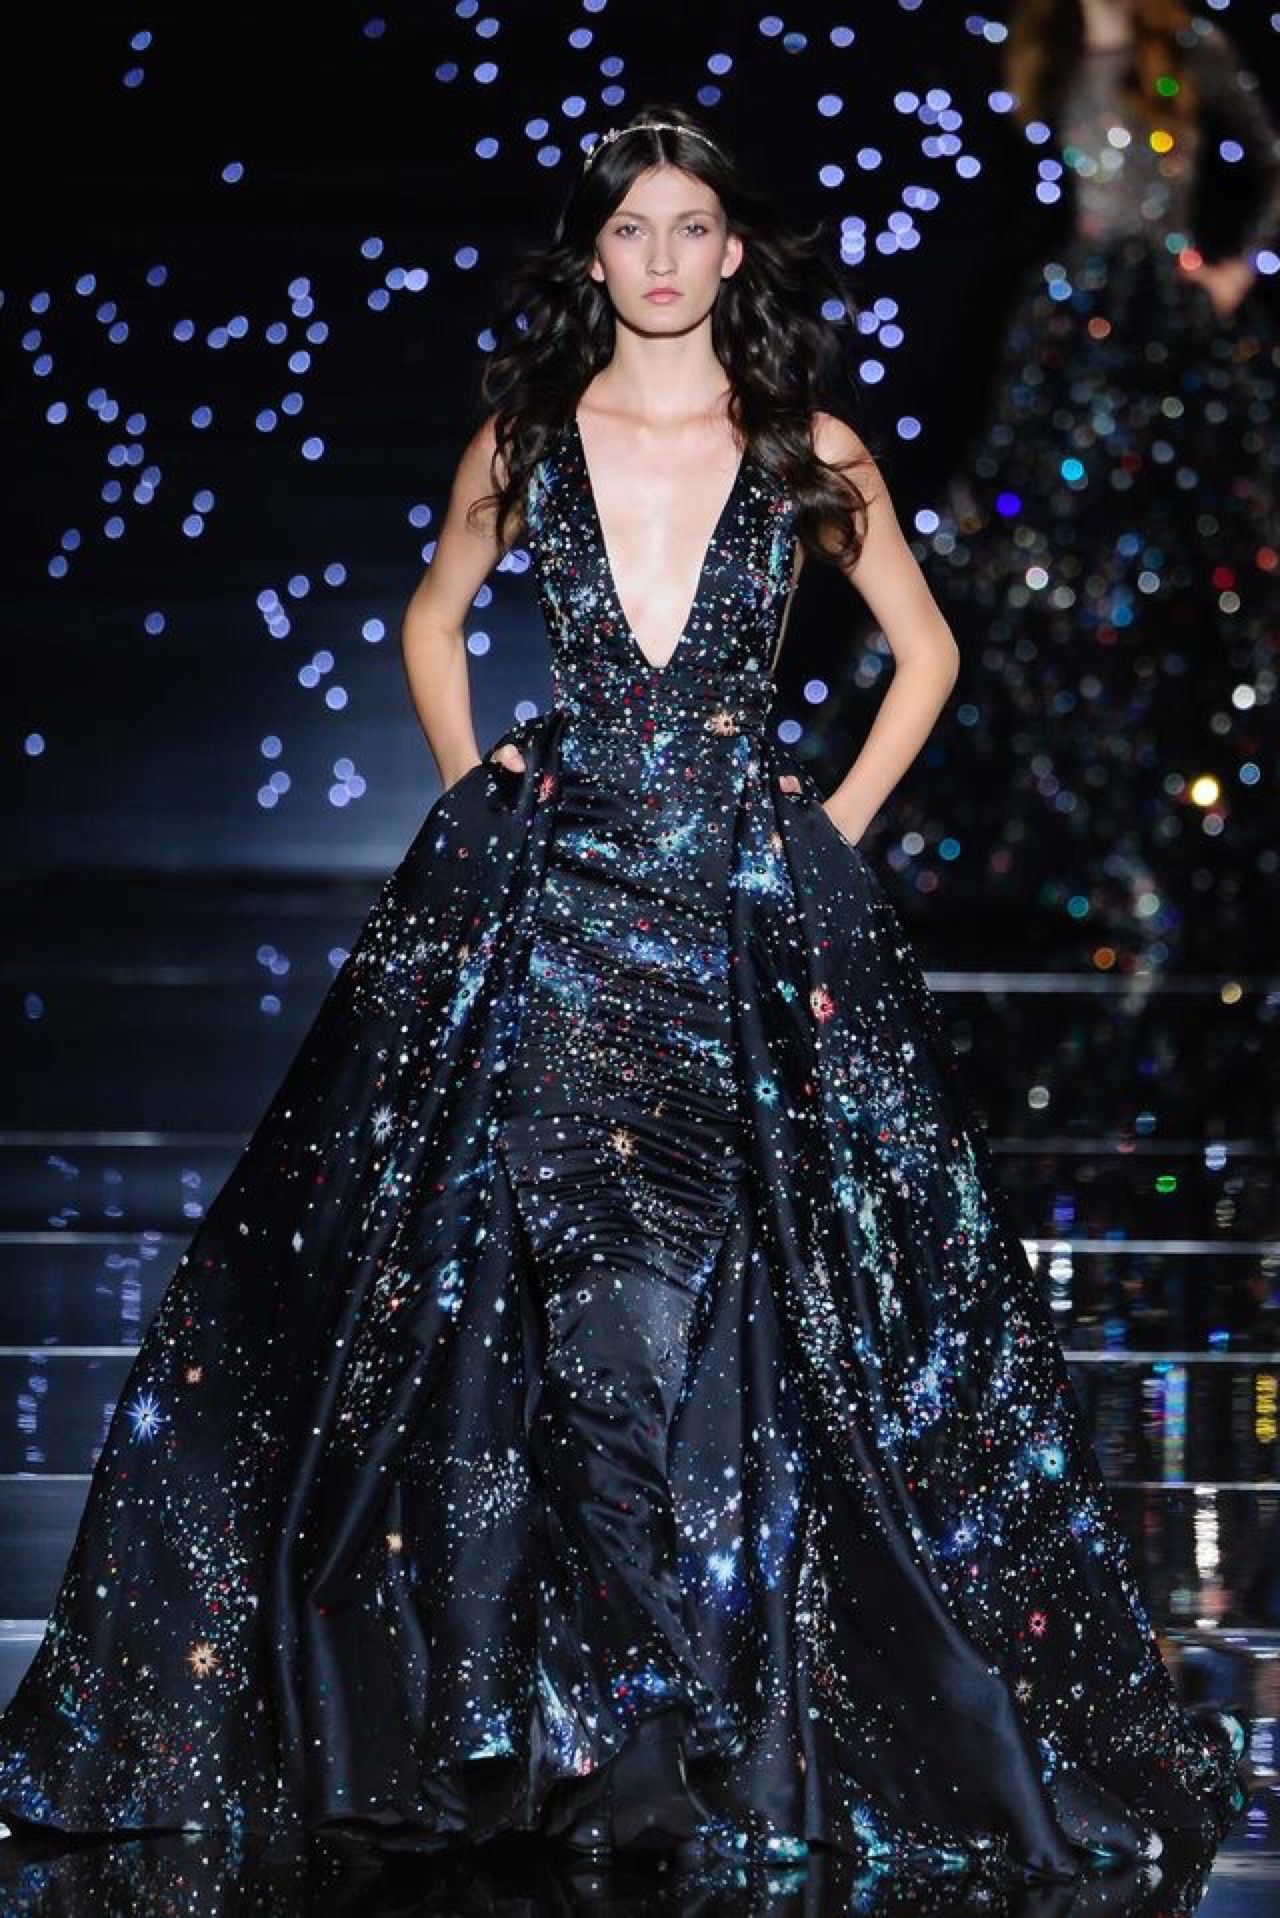 galaxy gown | Ropa | Pinterest | Gowns, Red carpet fashion and ...